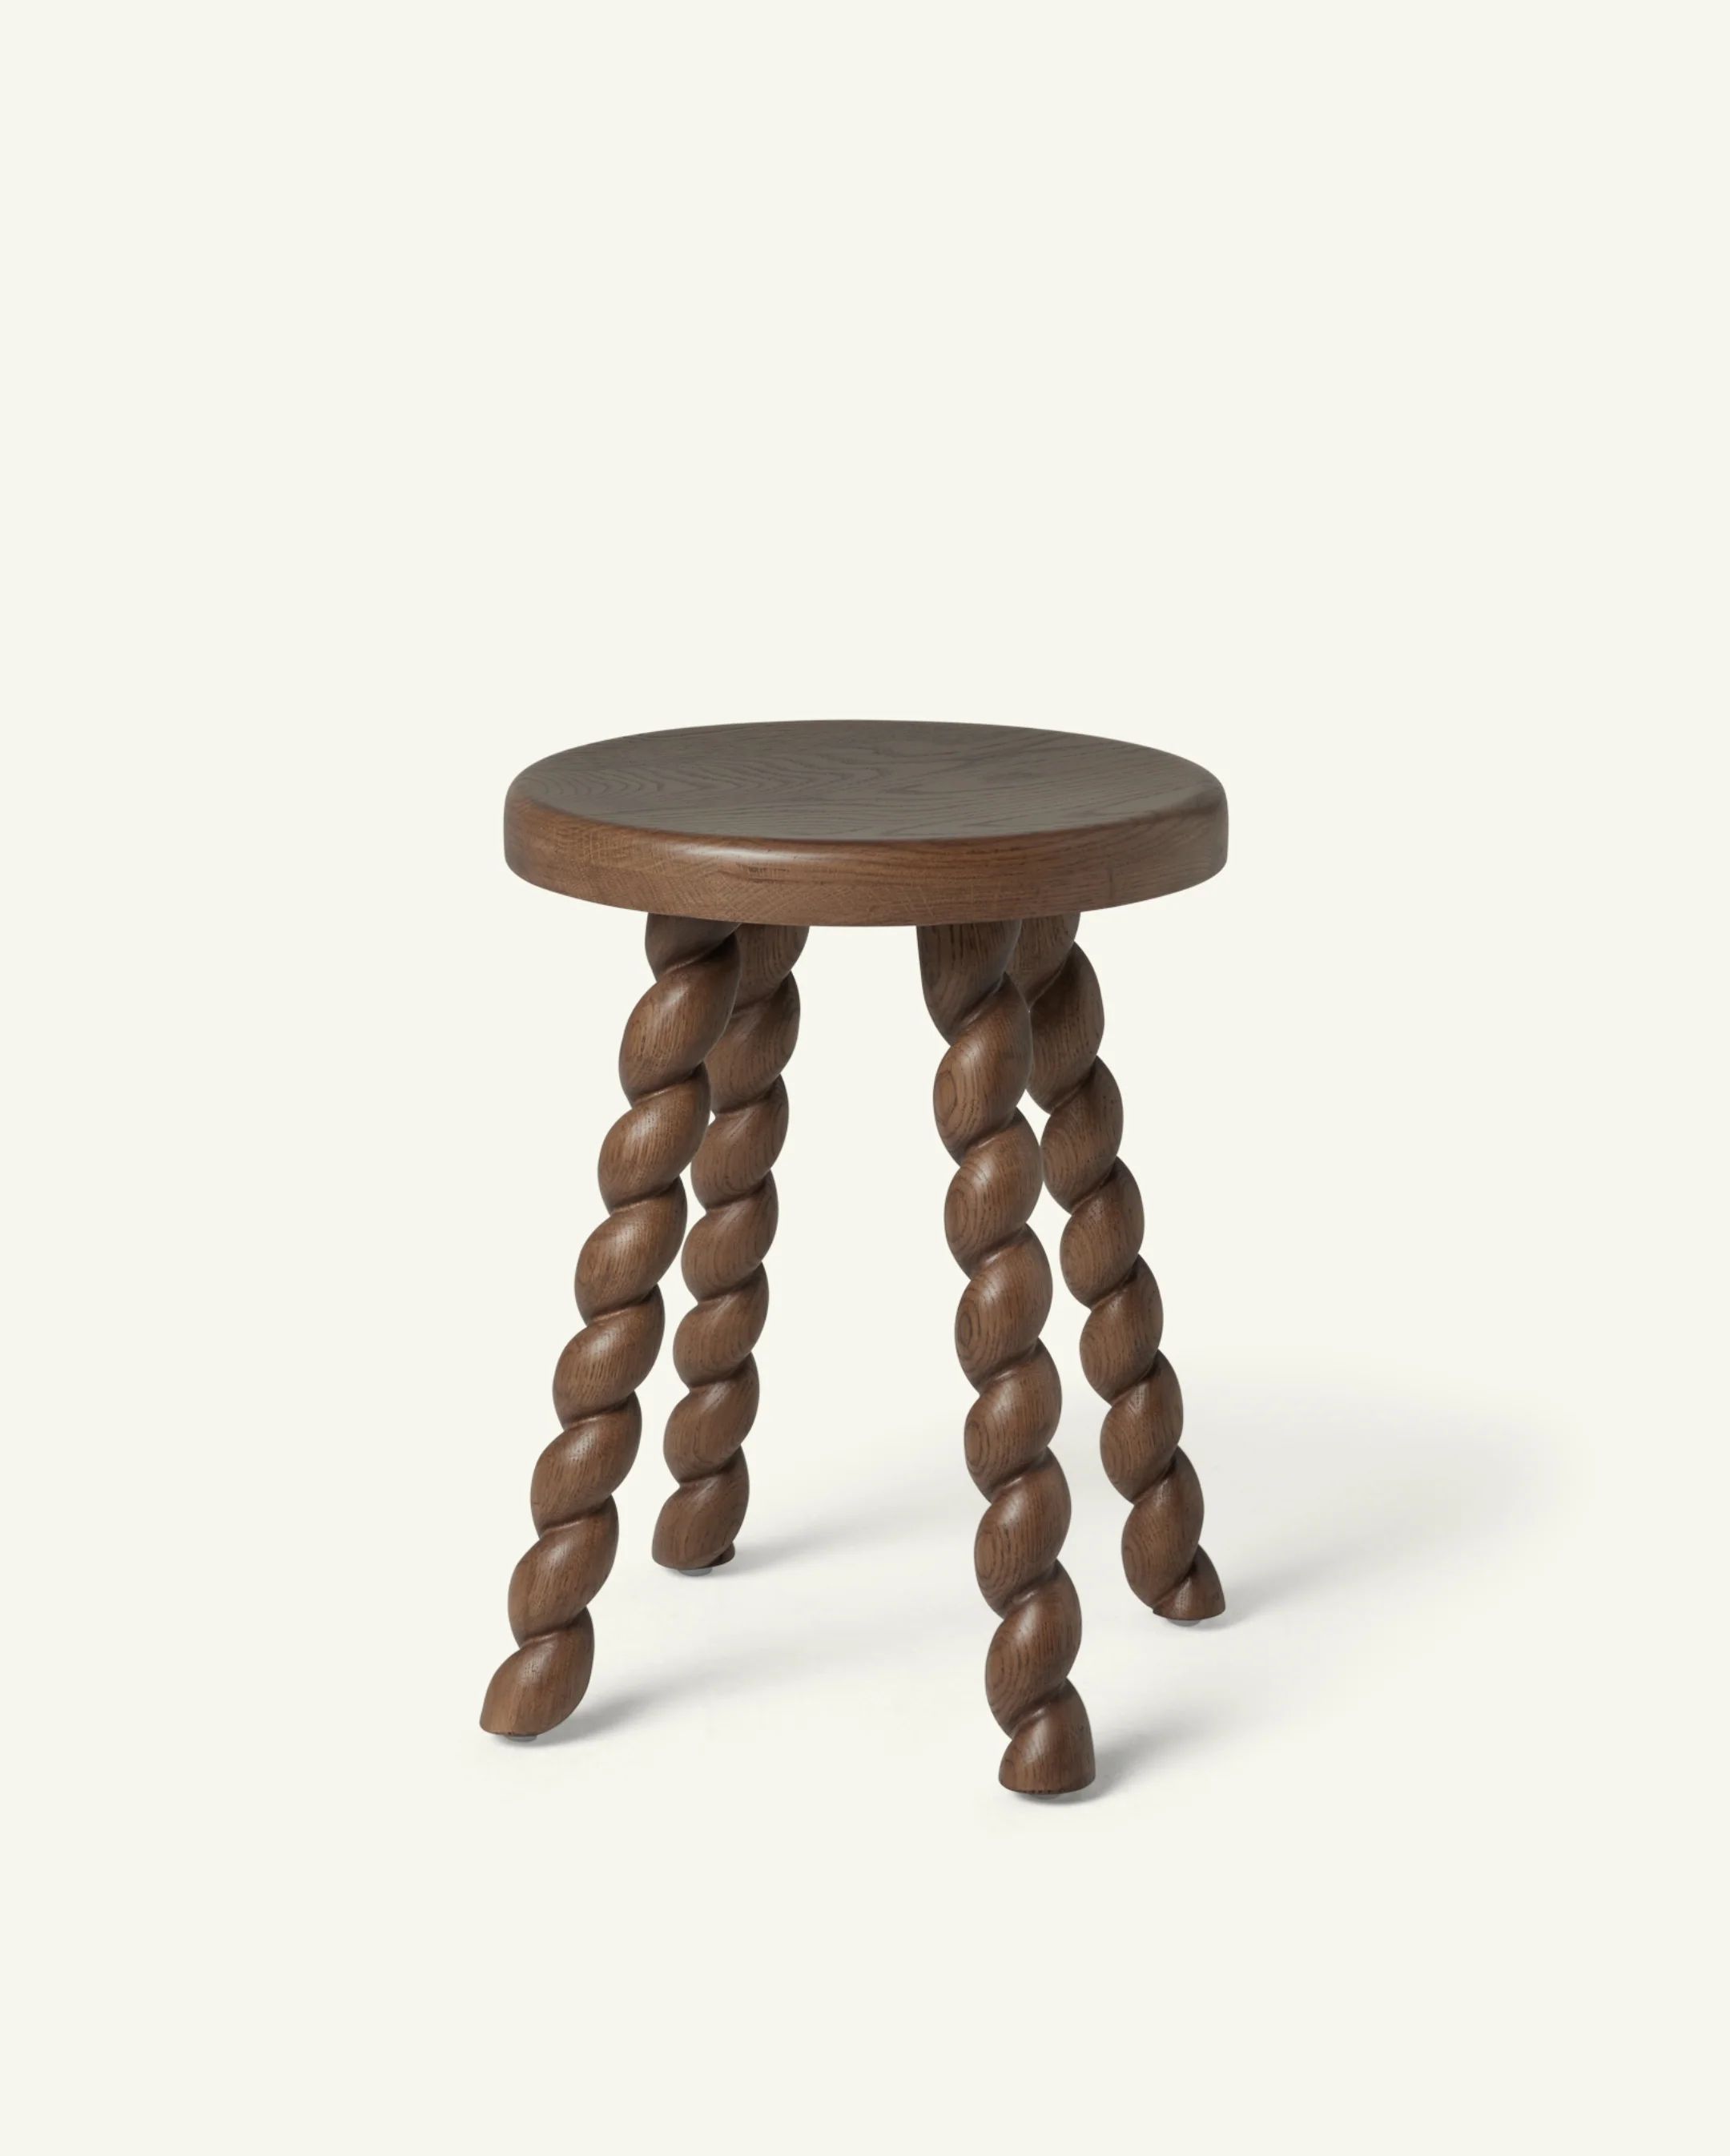 Twist side table - white oak with hand shaped spiral legs | Hati Home